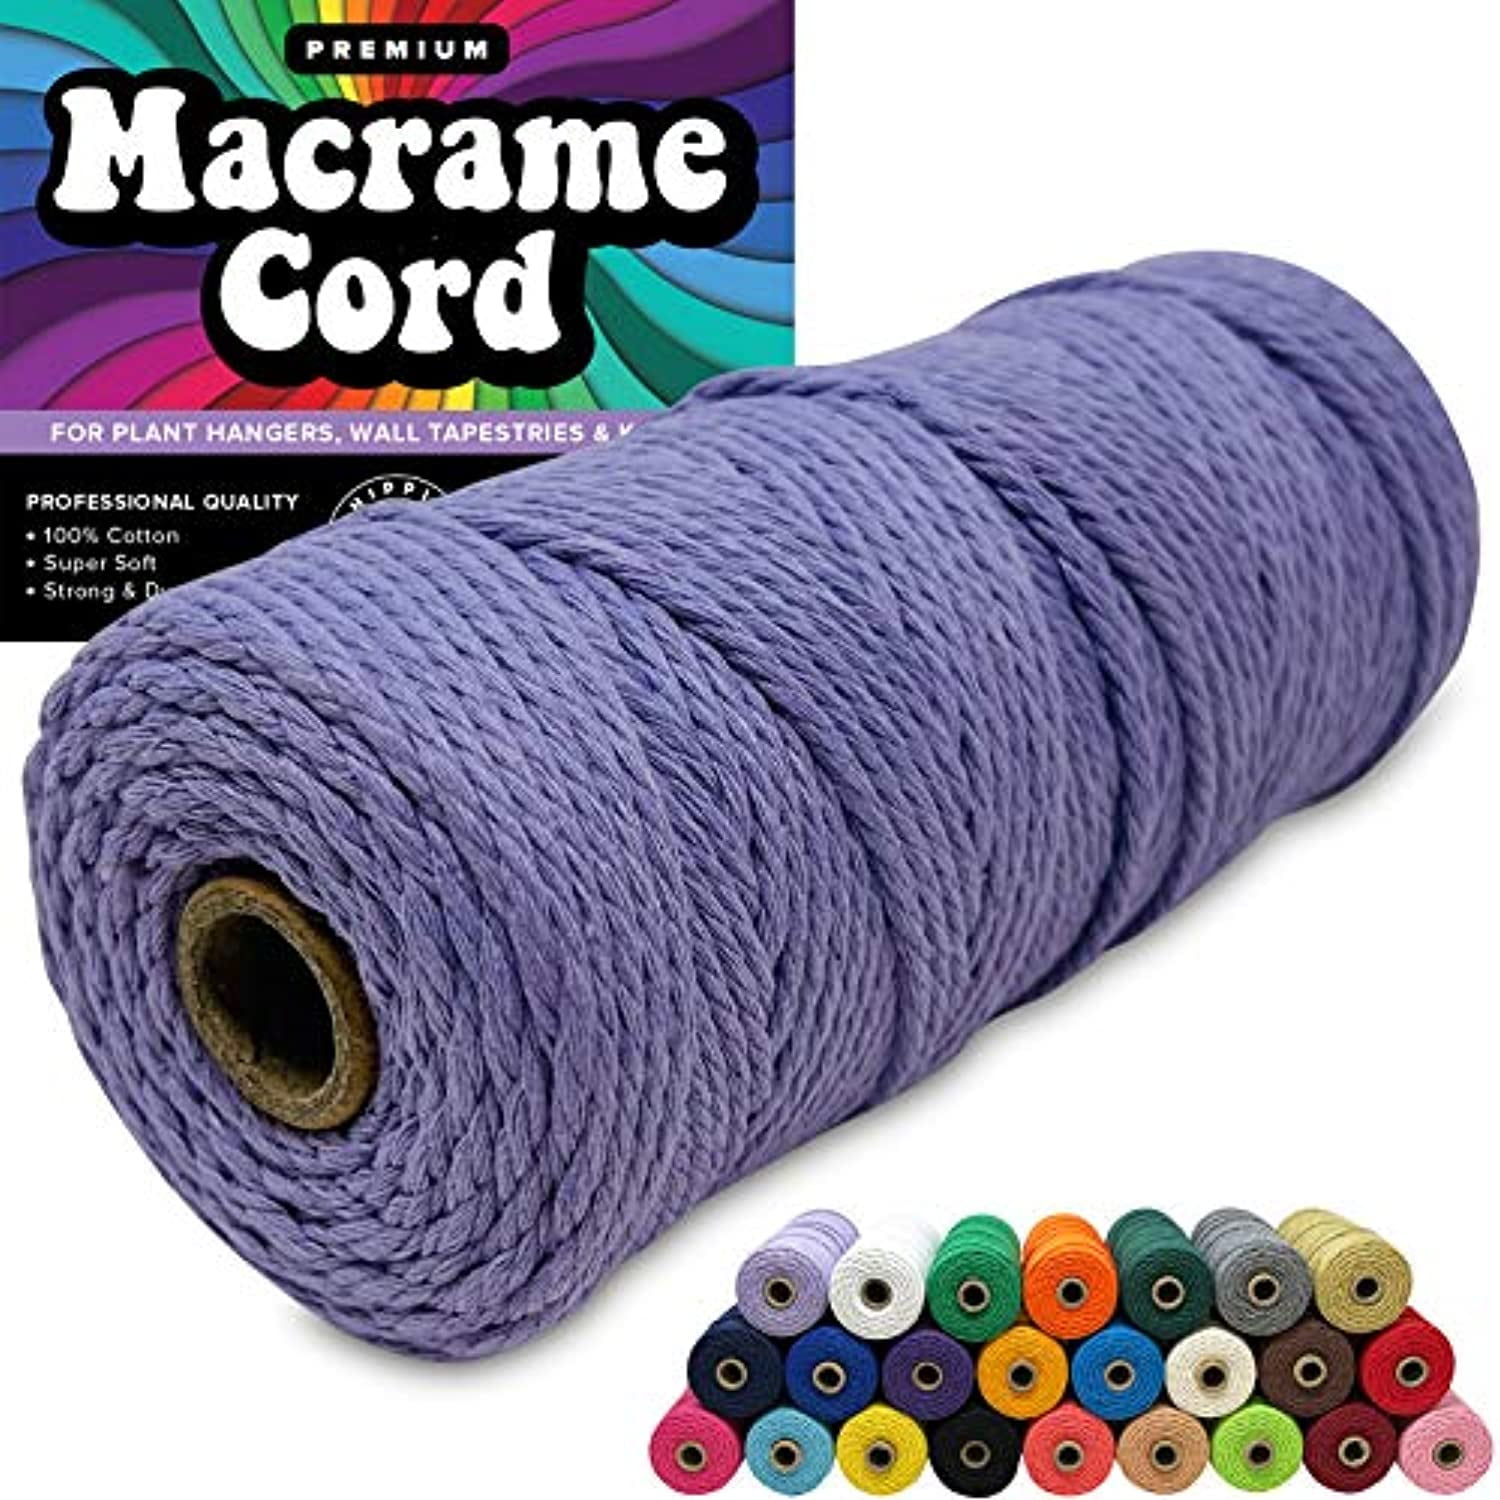 LECZIVOEN Macrame Cotton Cord, 4 Ply Twisted Macrame Yarn, Natural Cotton Cord Perfect Macrame Supplies for Macrame Plant Hangers DIY Craf